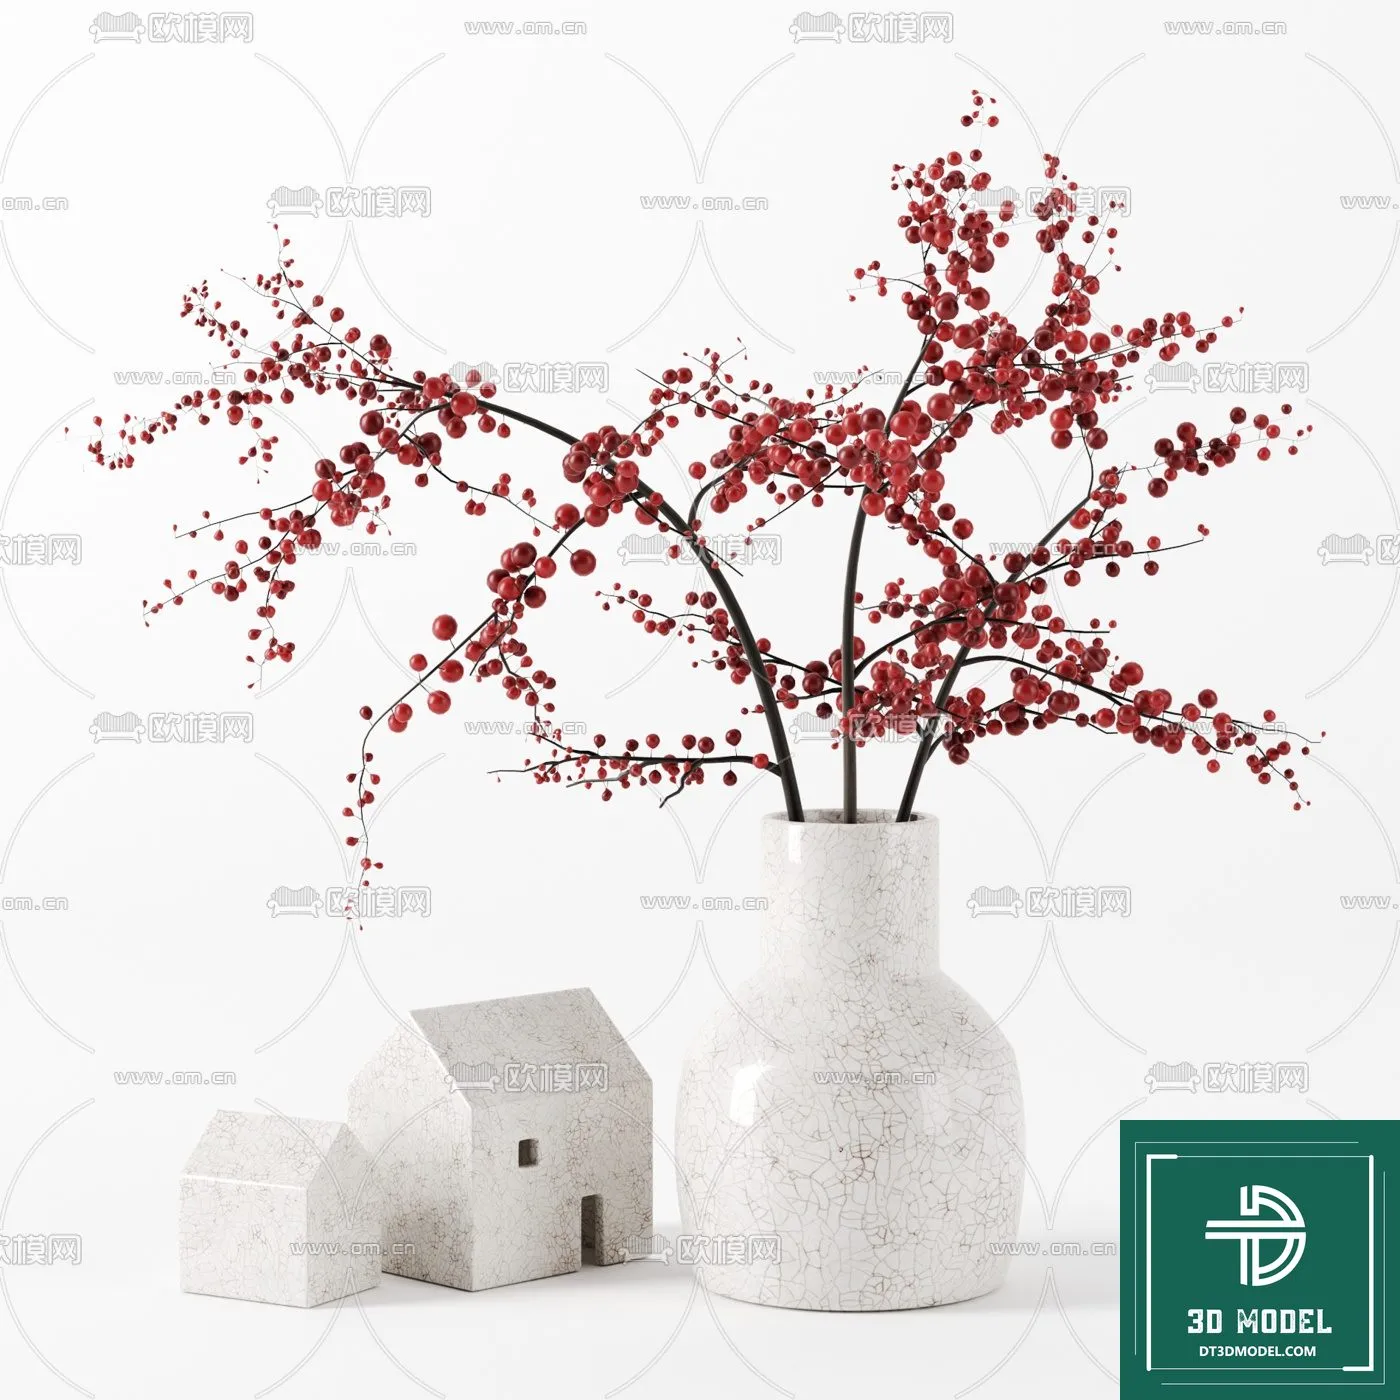 INDOCHINE STYLE – 3D MODELS – 166